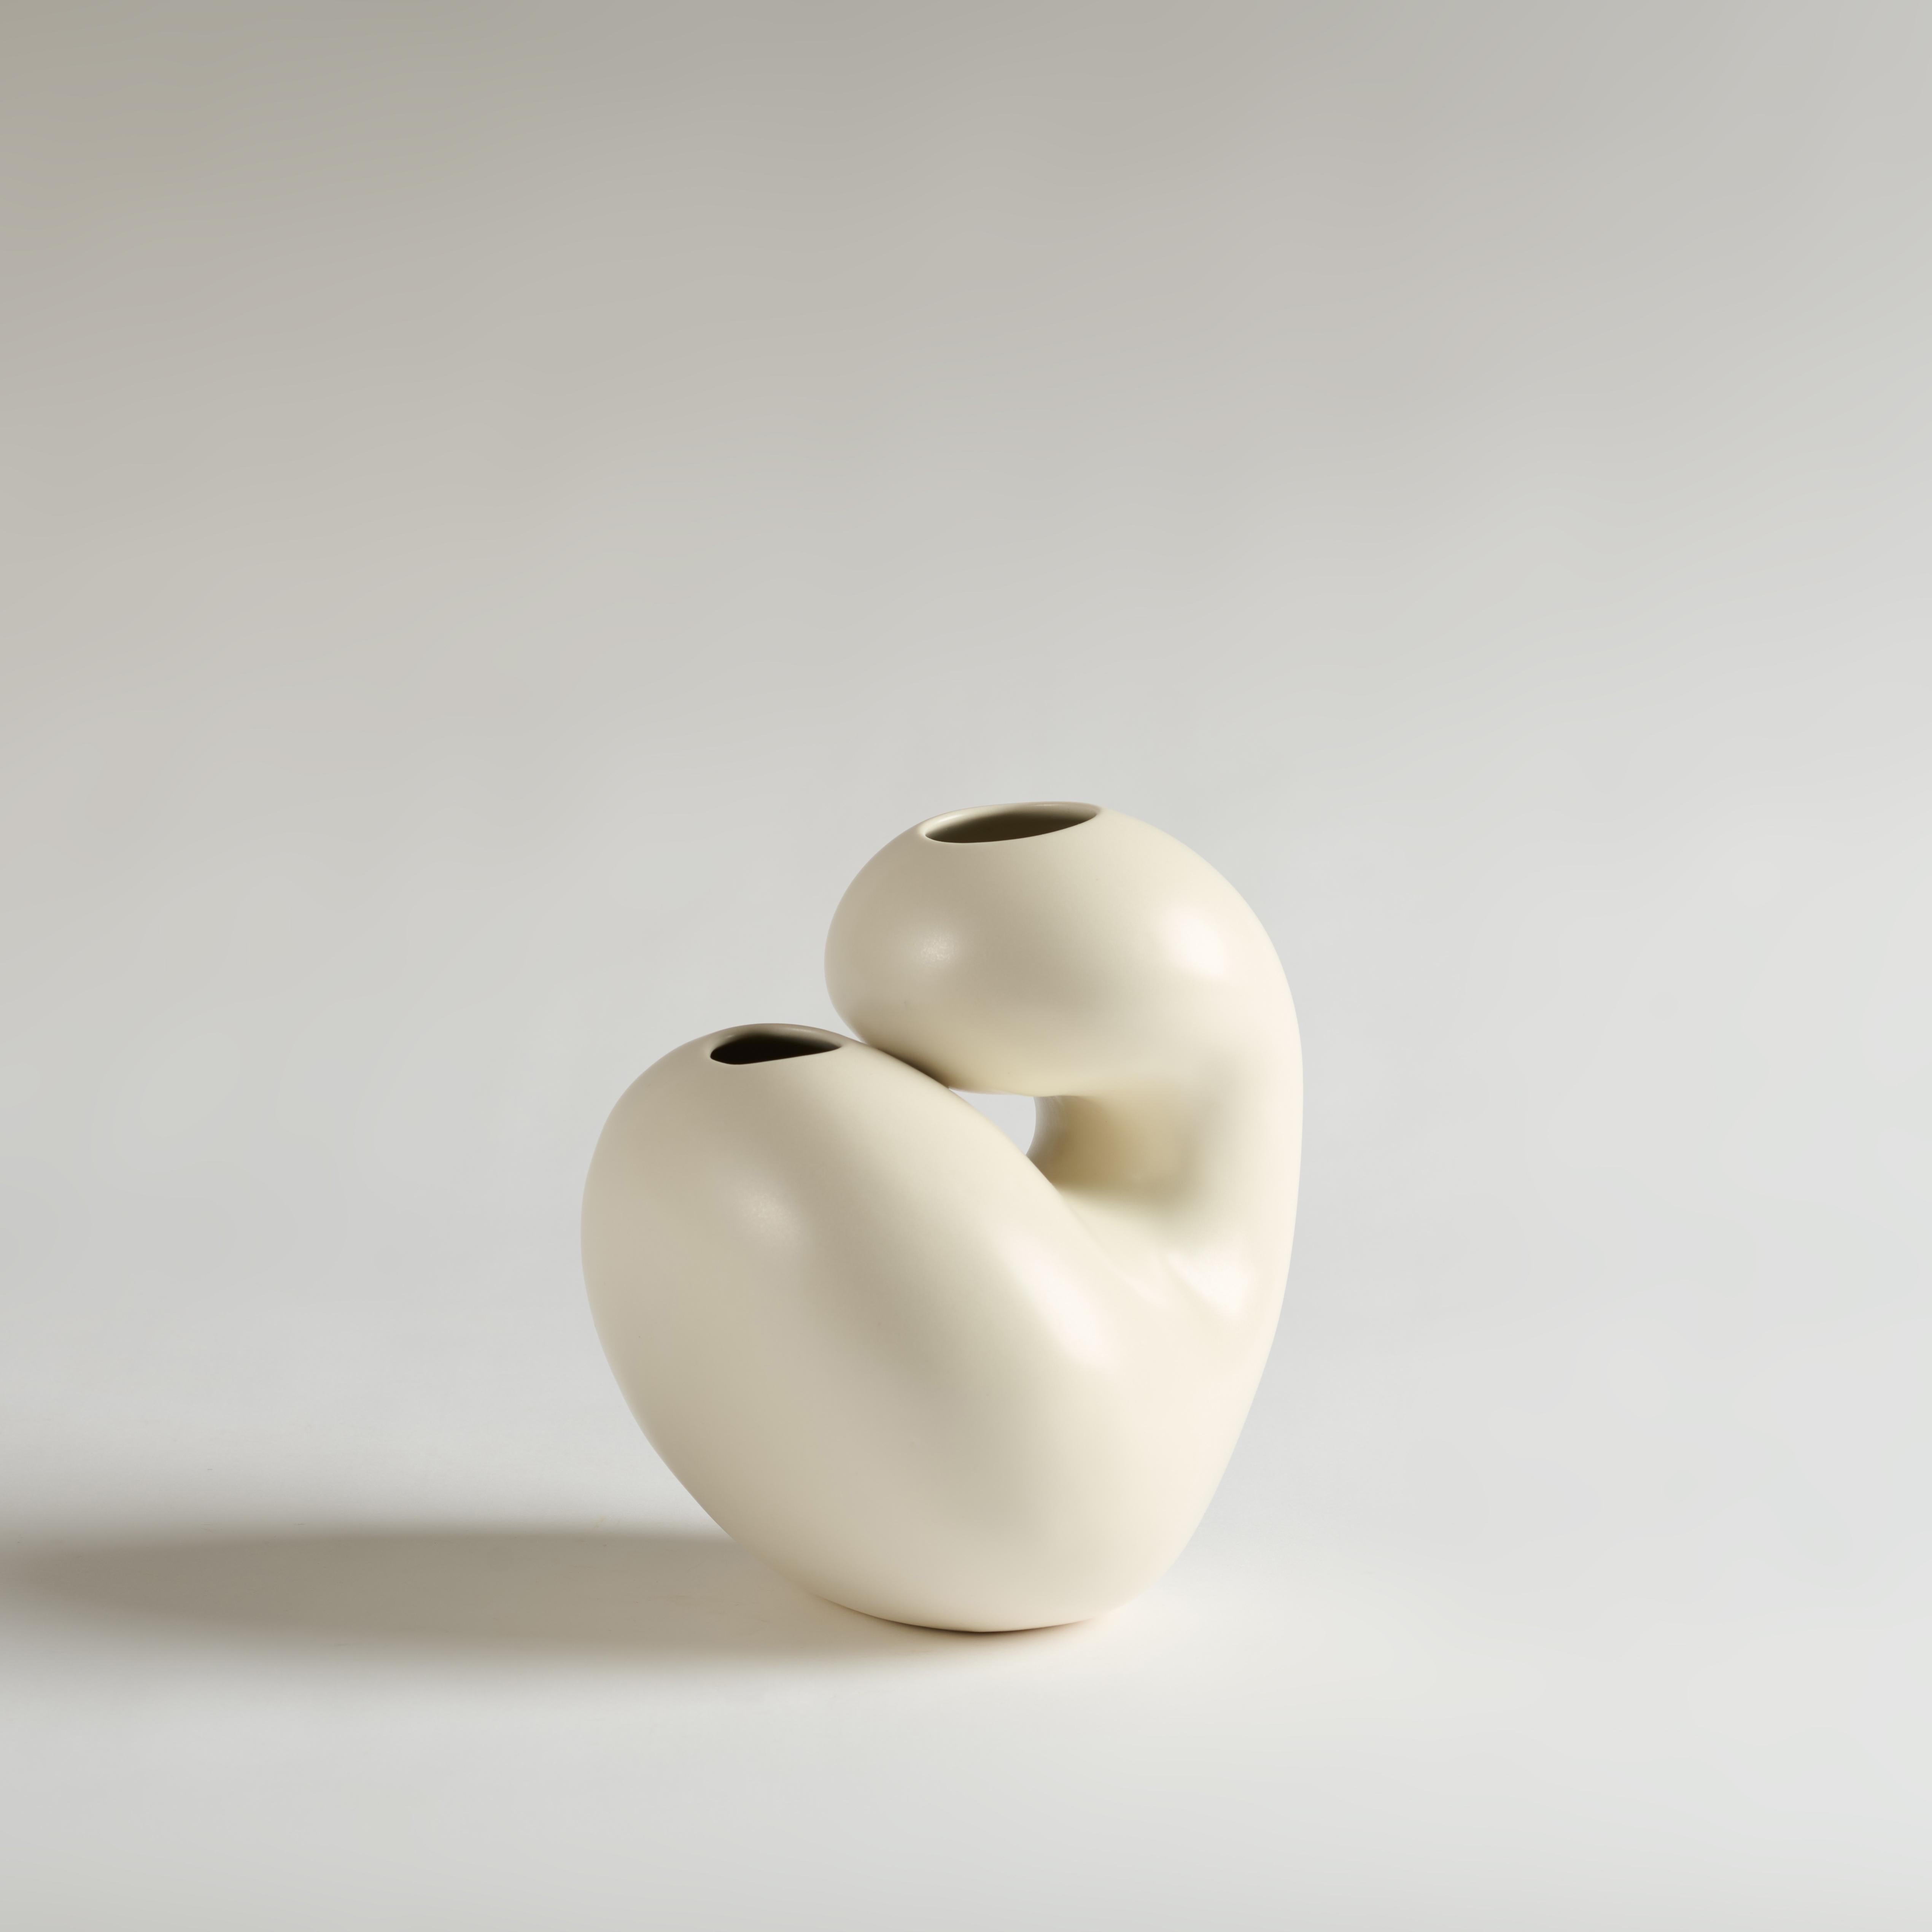 Vita Vessel by Dust and Form
Dimensions: W 20.3 x D 20.3 x 23 H cm
Materials: Plaster, finished in a Satin Ivory glaze both inside and out. This vessel is watertight and functional for fresh or dried arrangements.

- a form to evoke joy and life